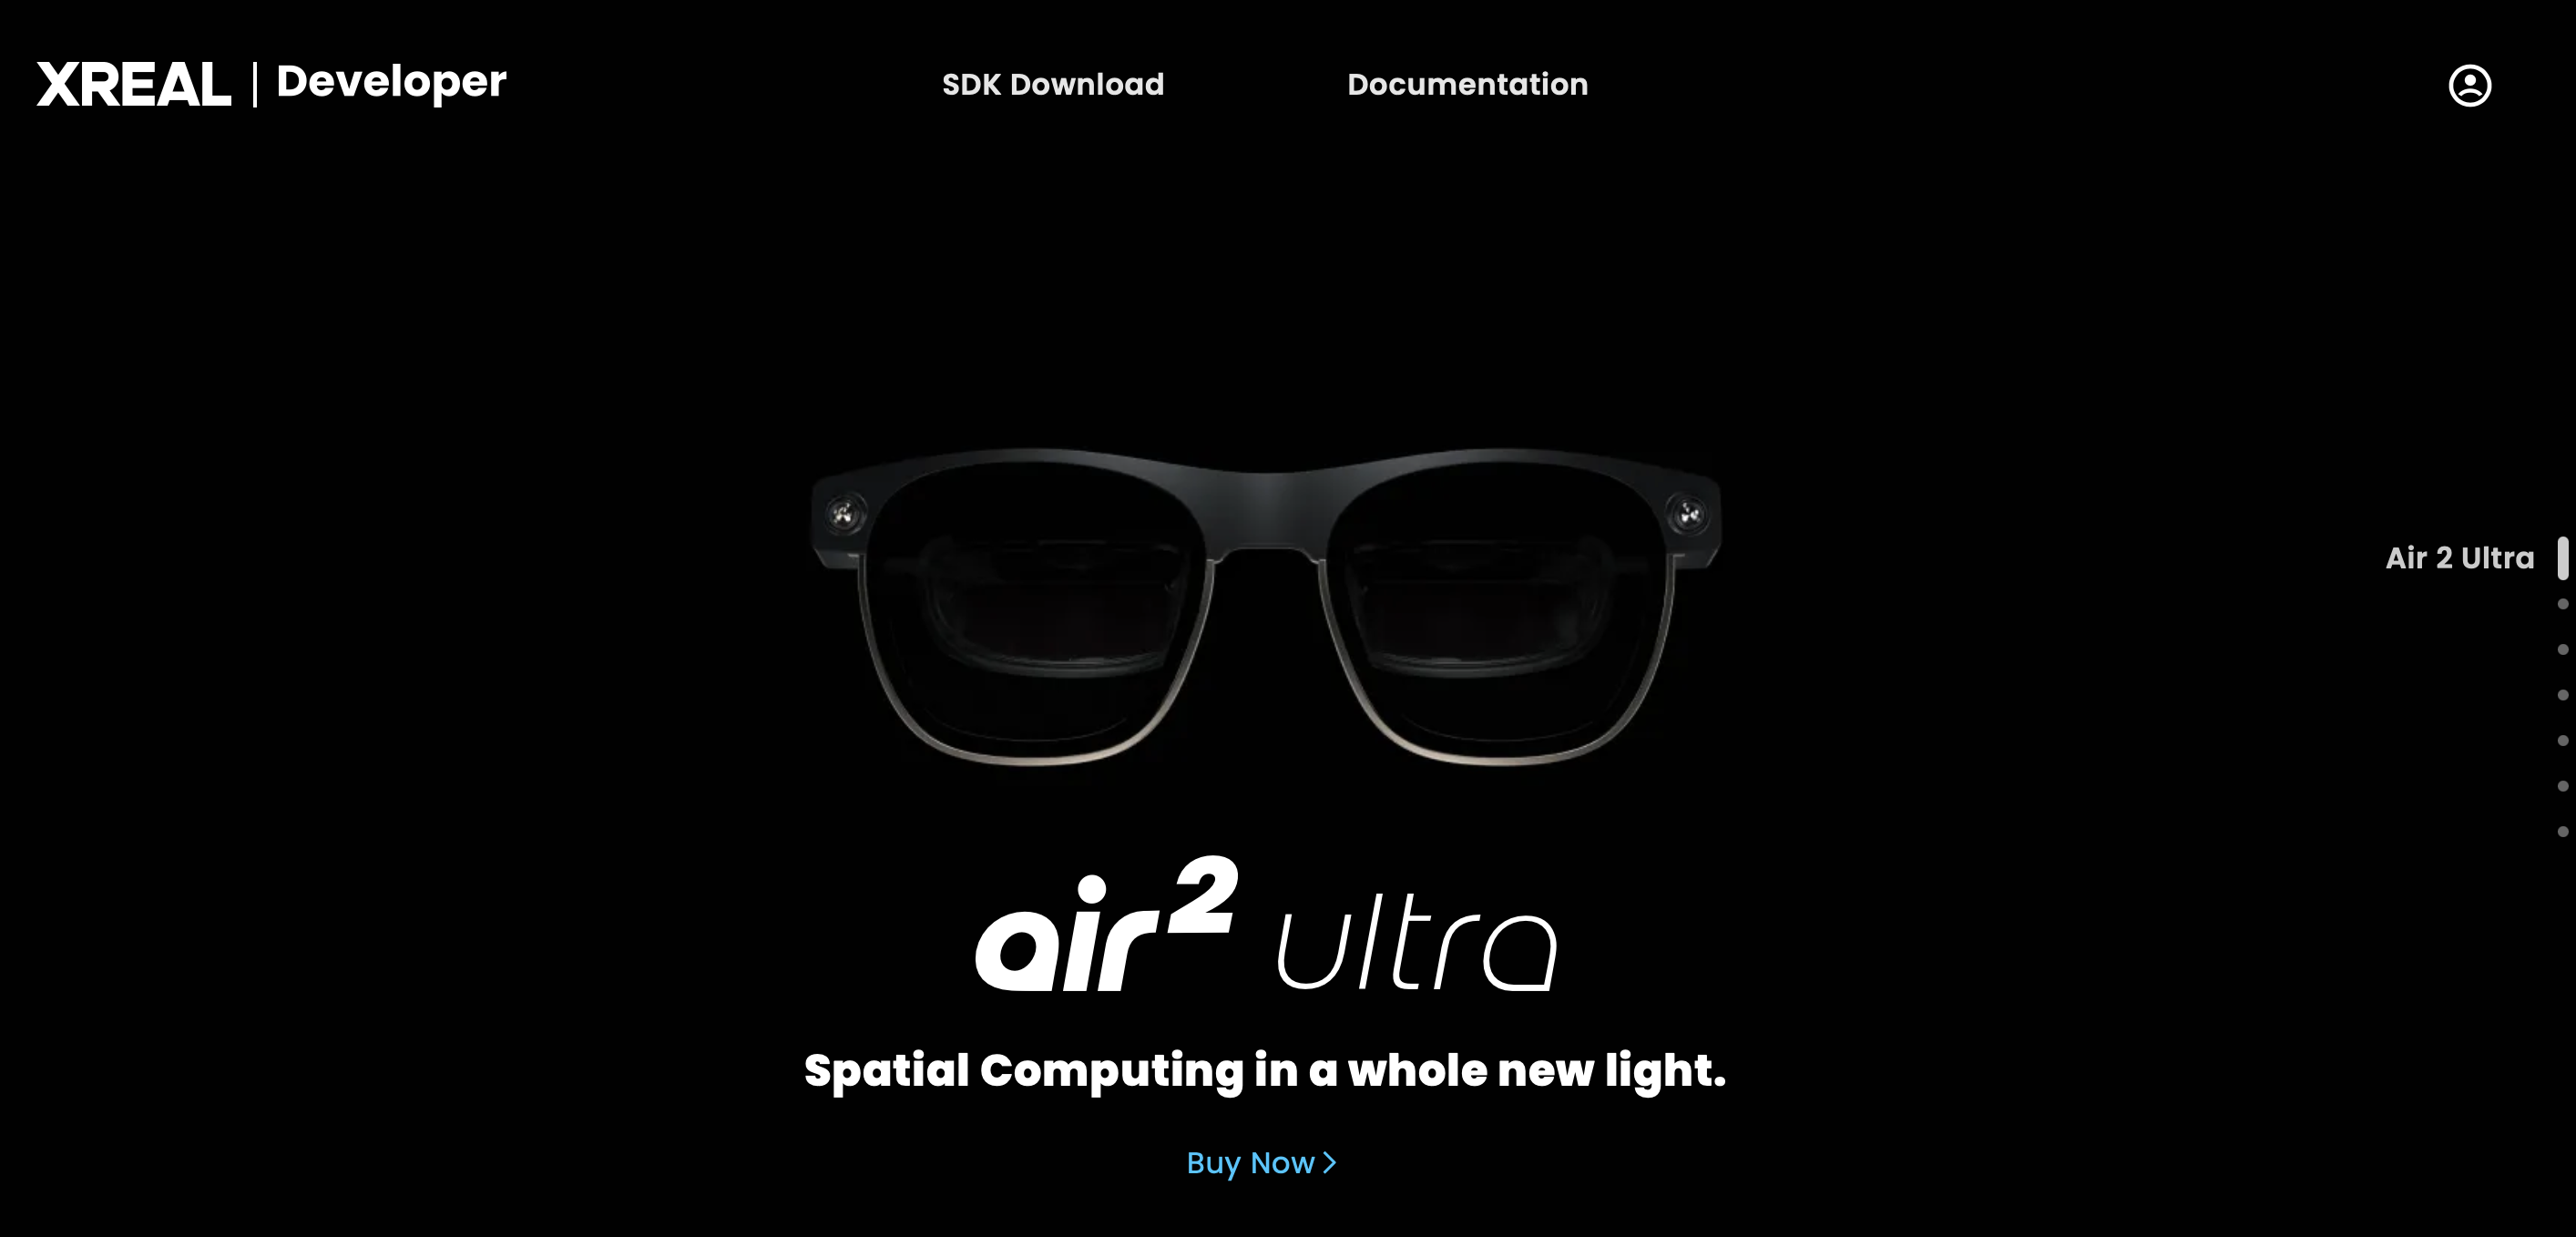 XREAL Air 2 and Air 2 Pro AR Glasses launched in China, pricing starts at  $342 - Gizmochina